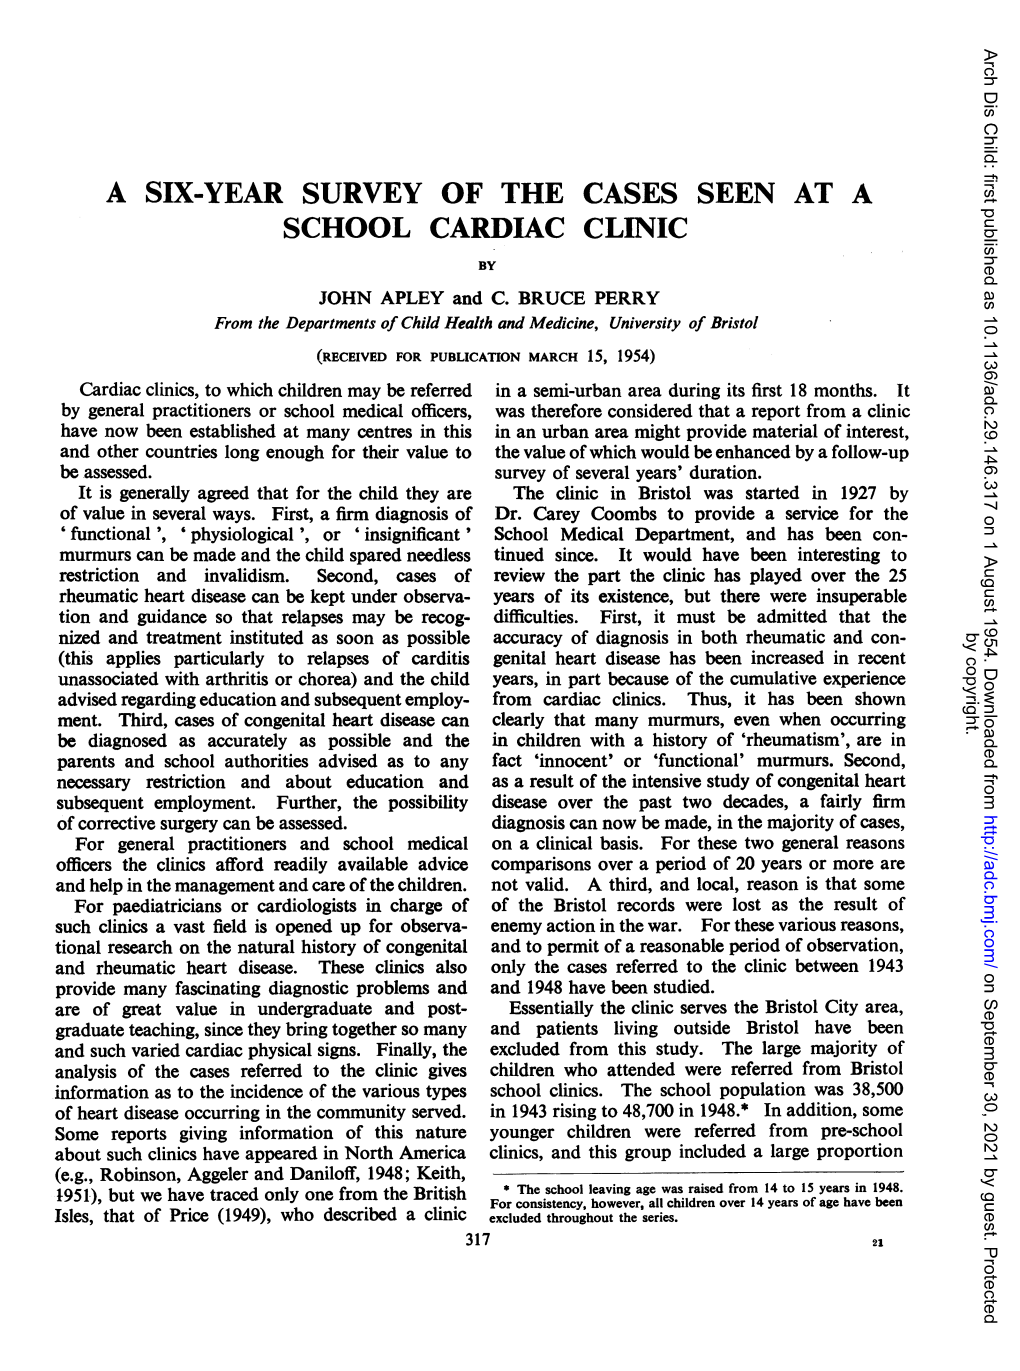 A SIX-YEAR SURVEY of the CASES SEEN at a SCHOOL CARDIAC CLINIC by JOHN APLEY and C